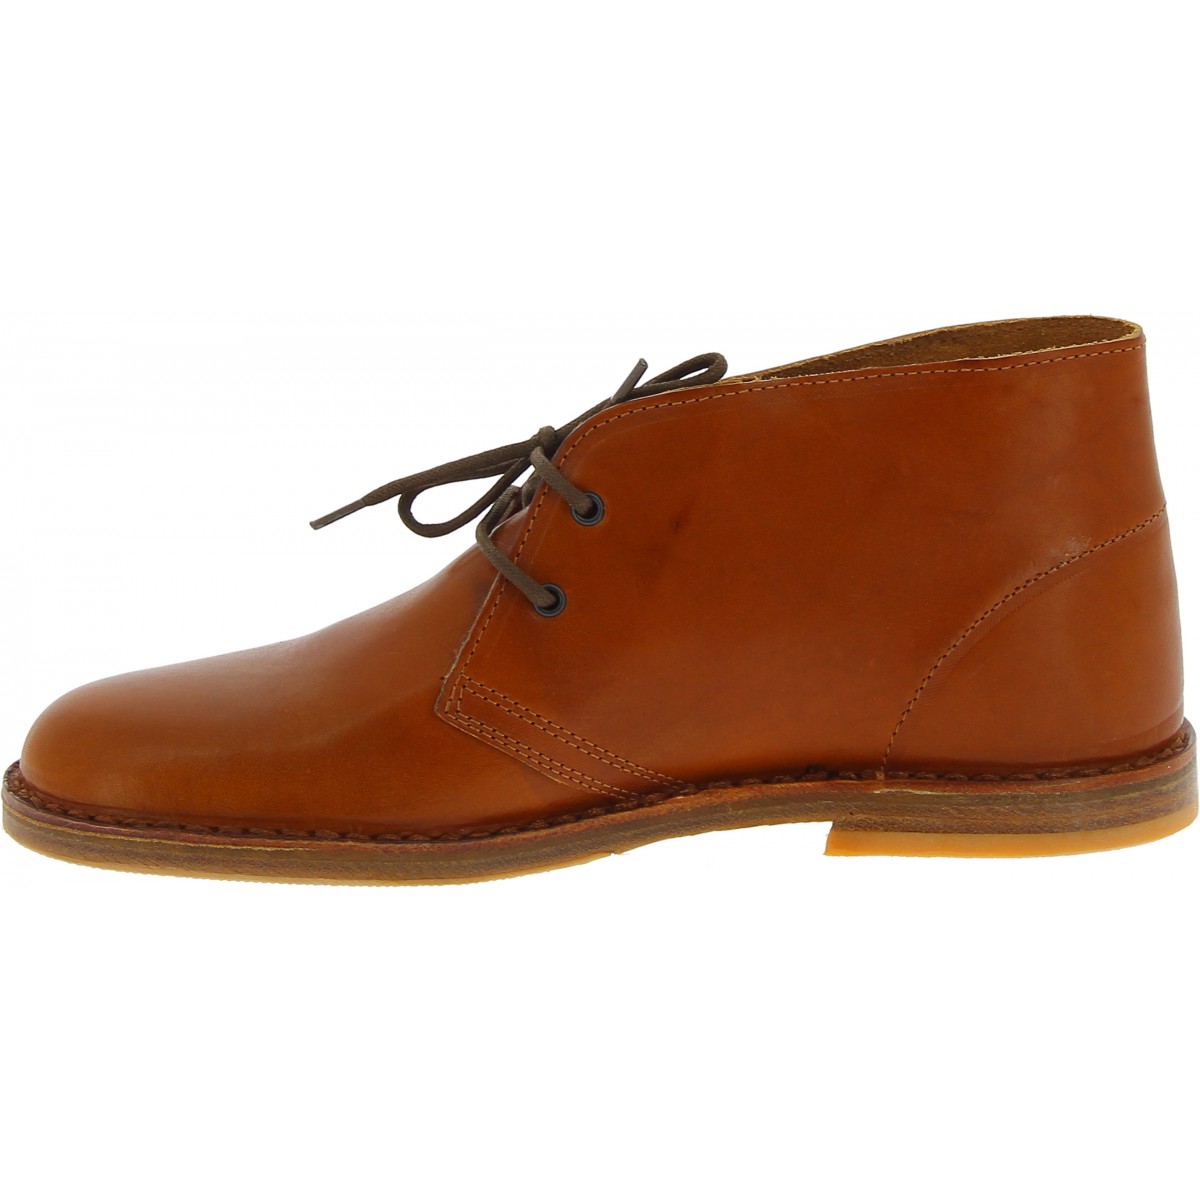 Men's tan leather chukka boots handmade in Italy | The leather craftsmen